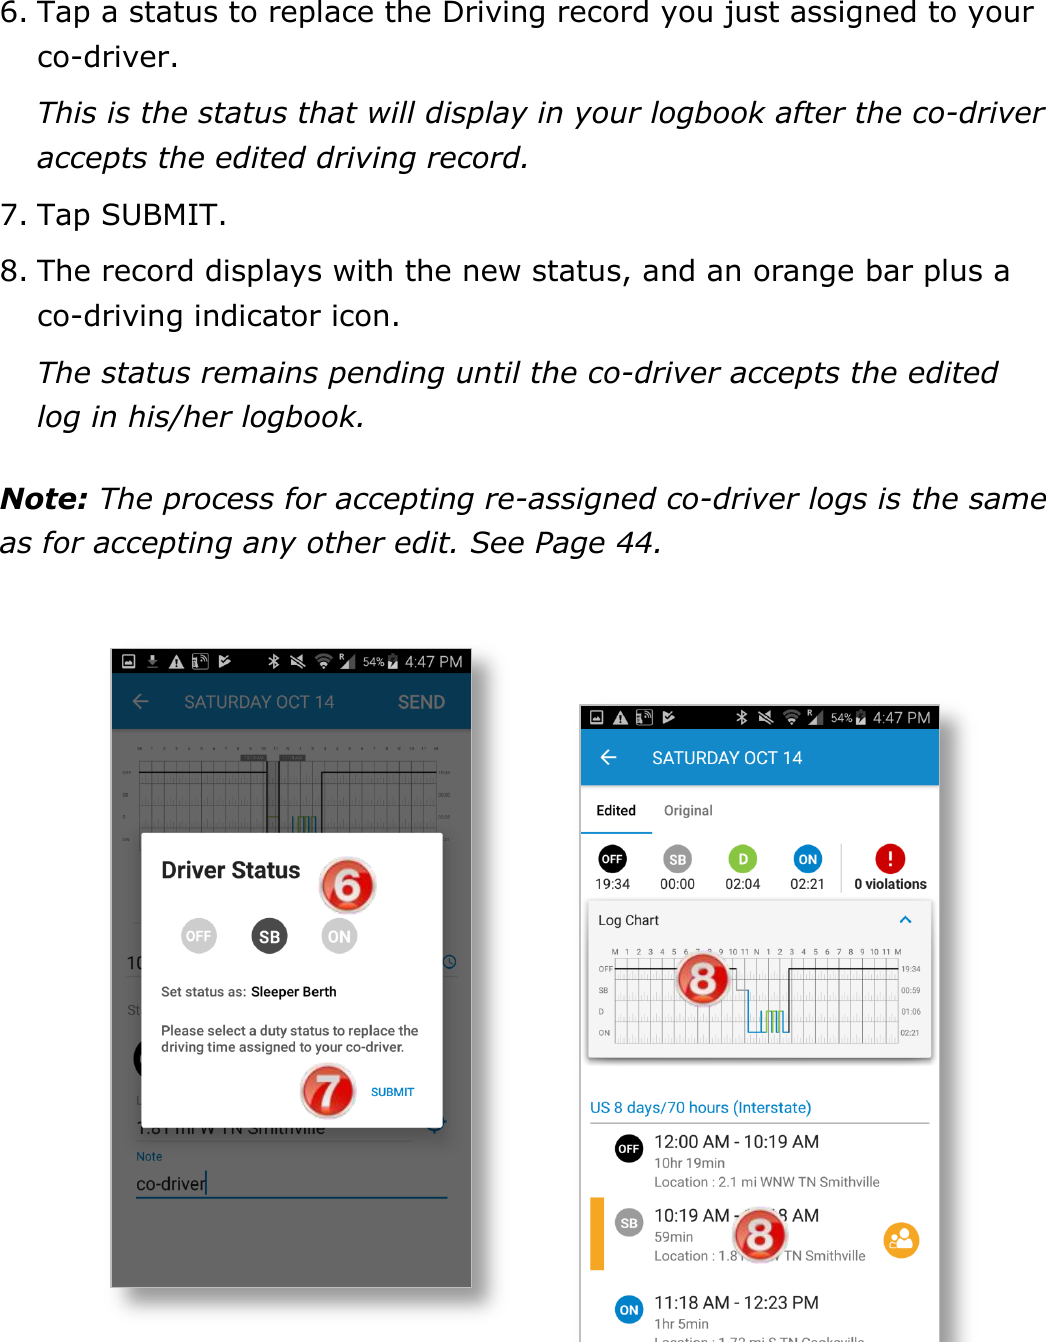 Manage Fuel Purchases DriverConnect User Guide  51 © 2017, Rand McNally, Inc. 6. Tap a status to replace the Driving record you just assigned to your co-driver. This is the status that will display in your logbook after the co-driver accepts the edited driving record.  7. Tap SUBMIT. 8. The record displays with the new status, and an orange bar plus a co-driving indicator icon. The status remains pending until the co-driver accepts the edited log in his/her logbook. Note: The process for accepting re-assigned co-driver logs is the same as for accepting any other edit. See Page 44.    